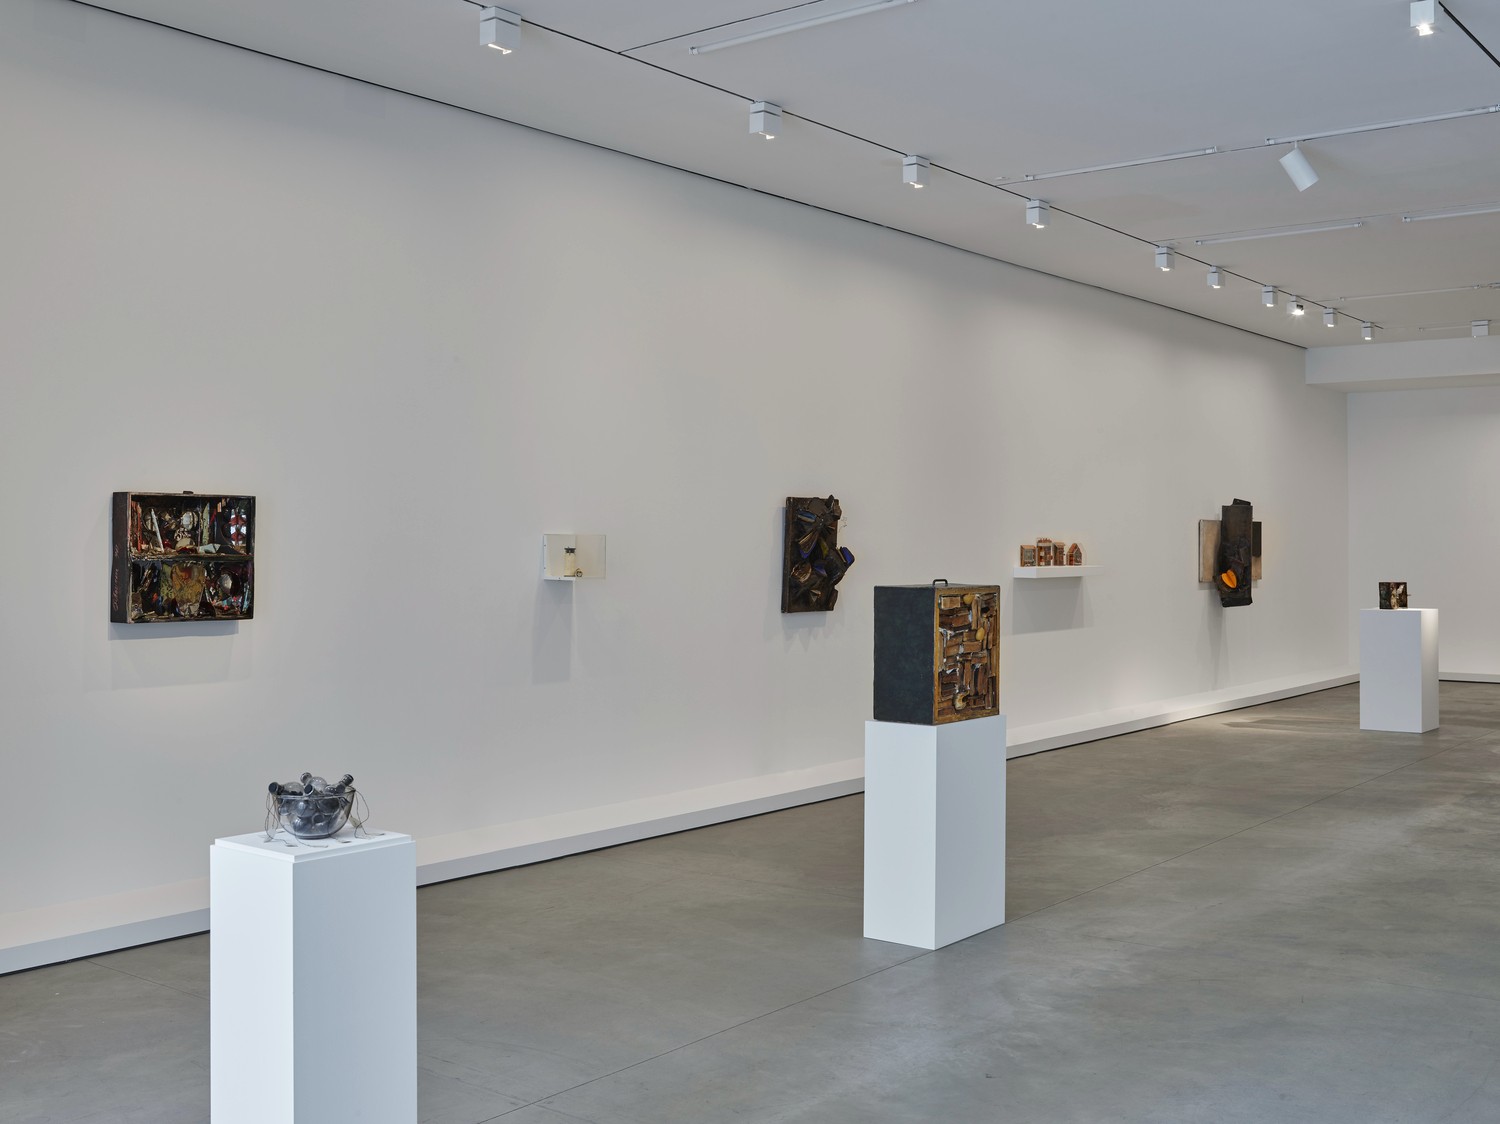 Installation image for Controlled Burnings: Hiller, Latham, Schneemann, at Lisson Gallery